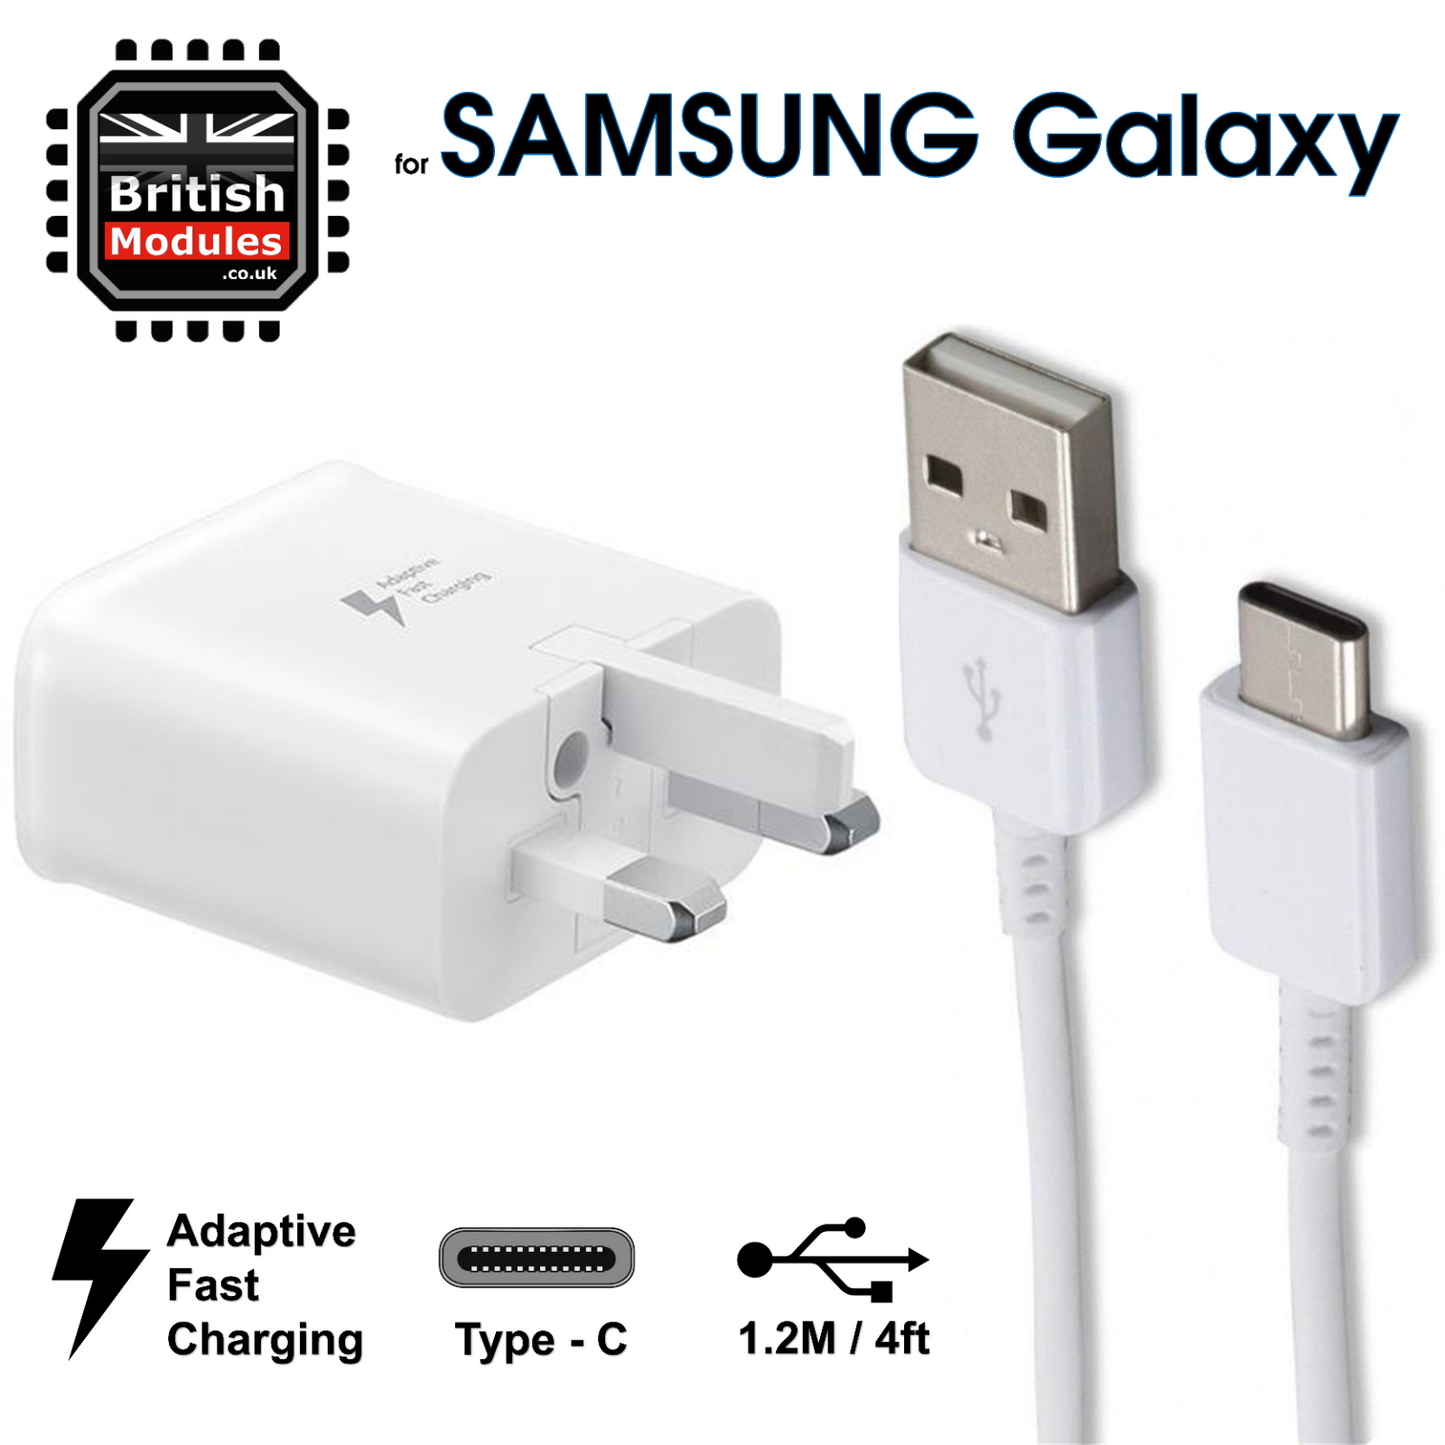 Samsung 15W Travel Adapter Adaptive Fast Charging Plug & Cable Type-C for Galaxy S8 S8+ S9 S10 Plus Note 8 9